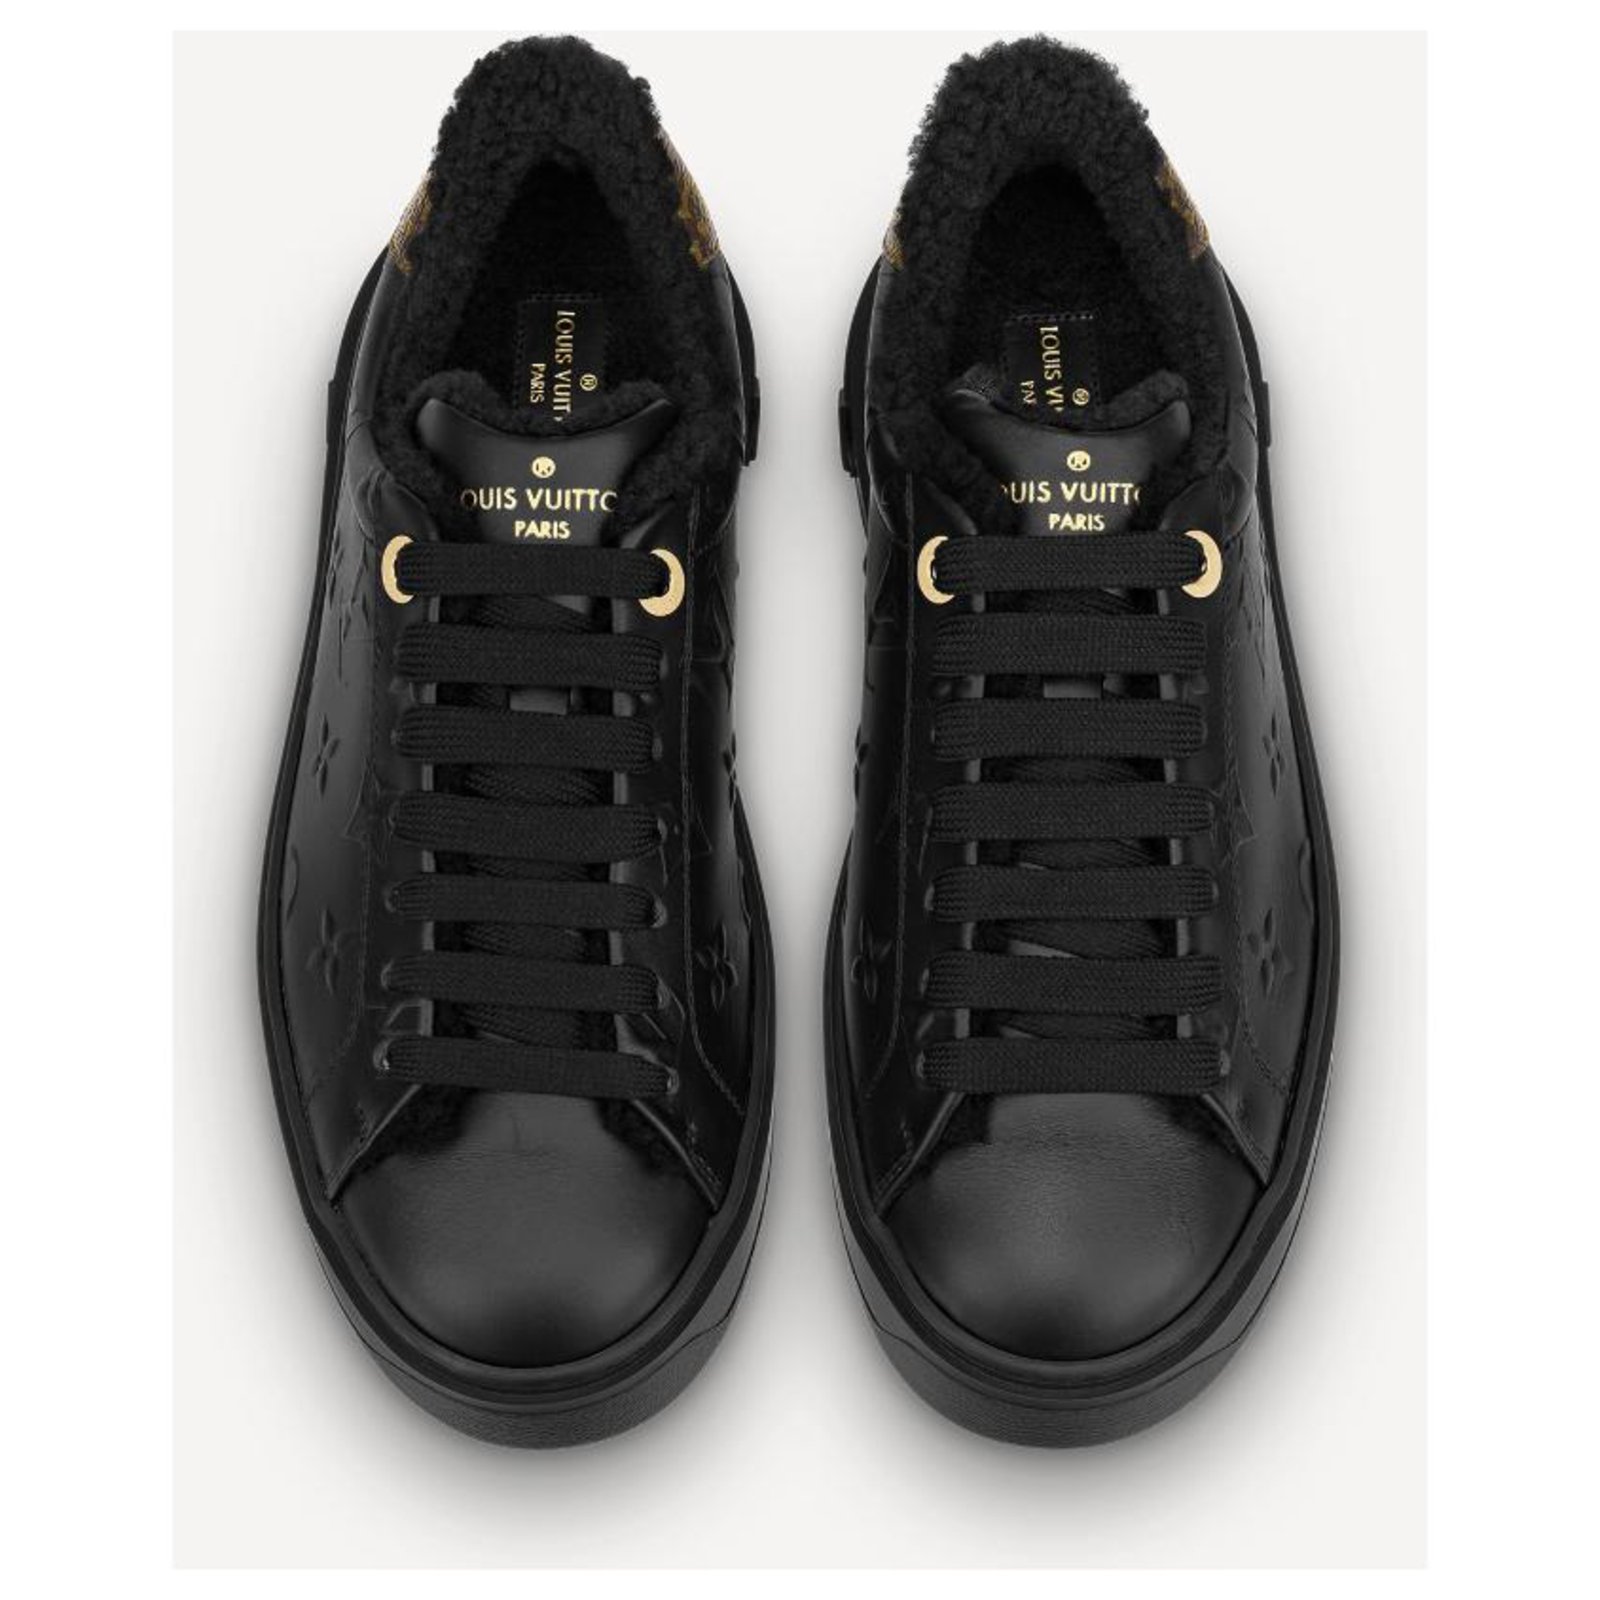 LOUIS VUITTON Time Out Leather Sneakers Black Size 37 1/2